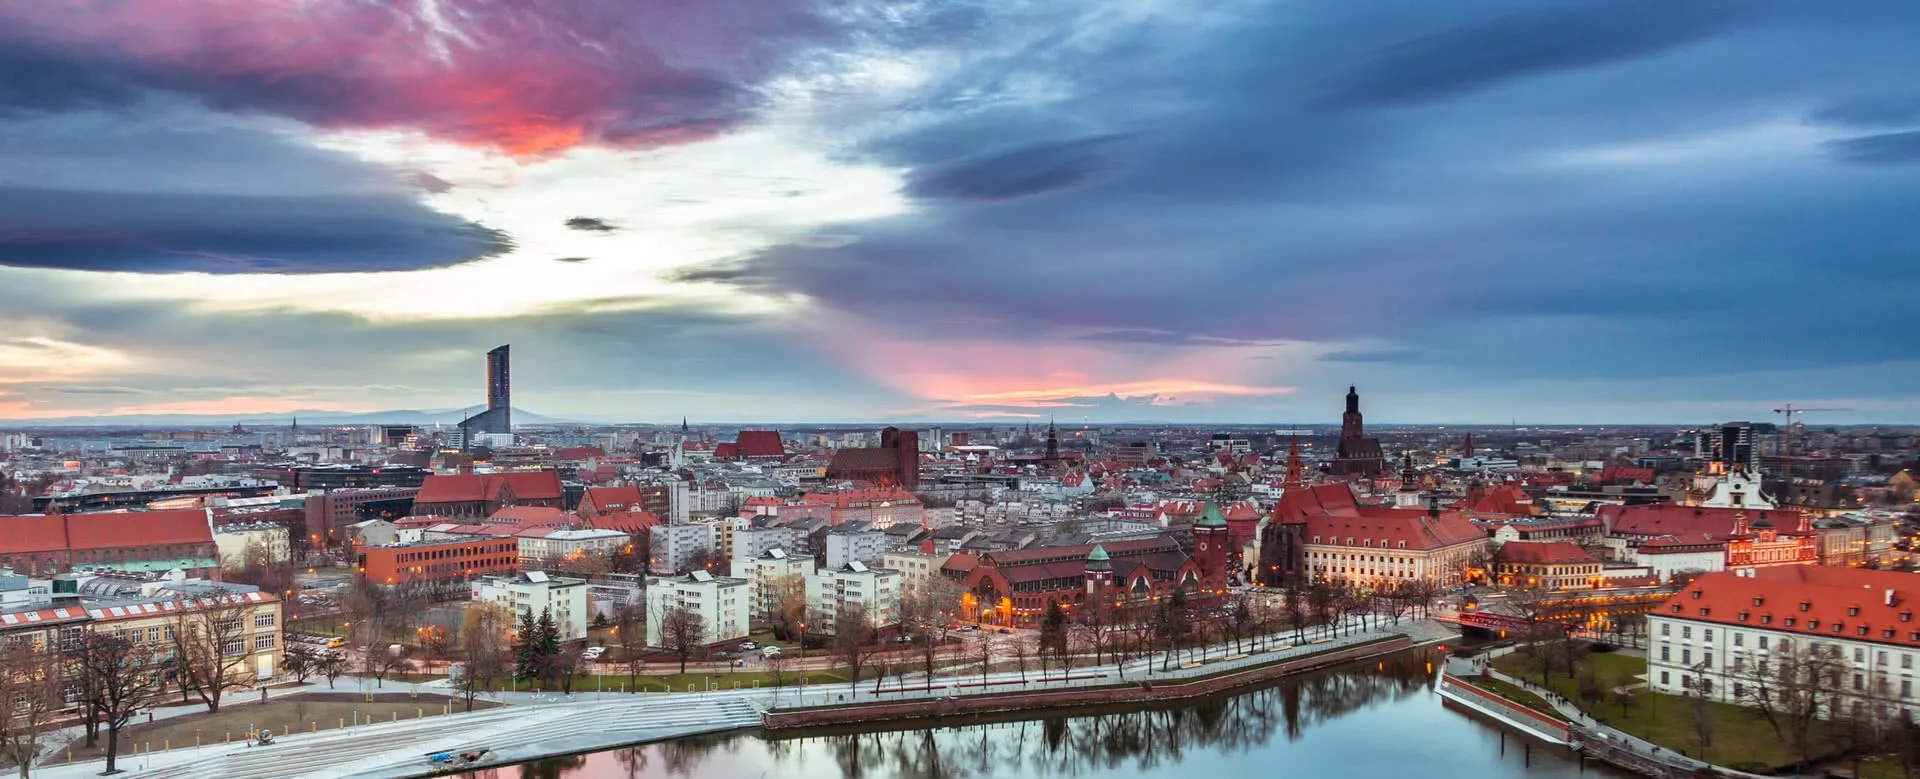 Wroclaw - the destination for company trips